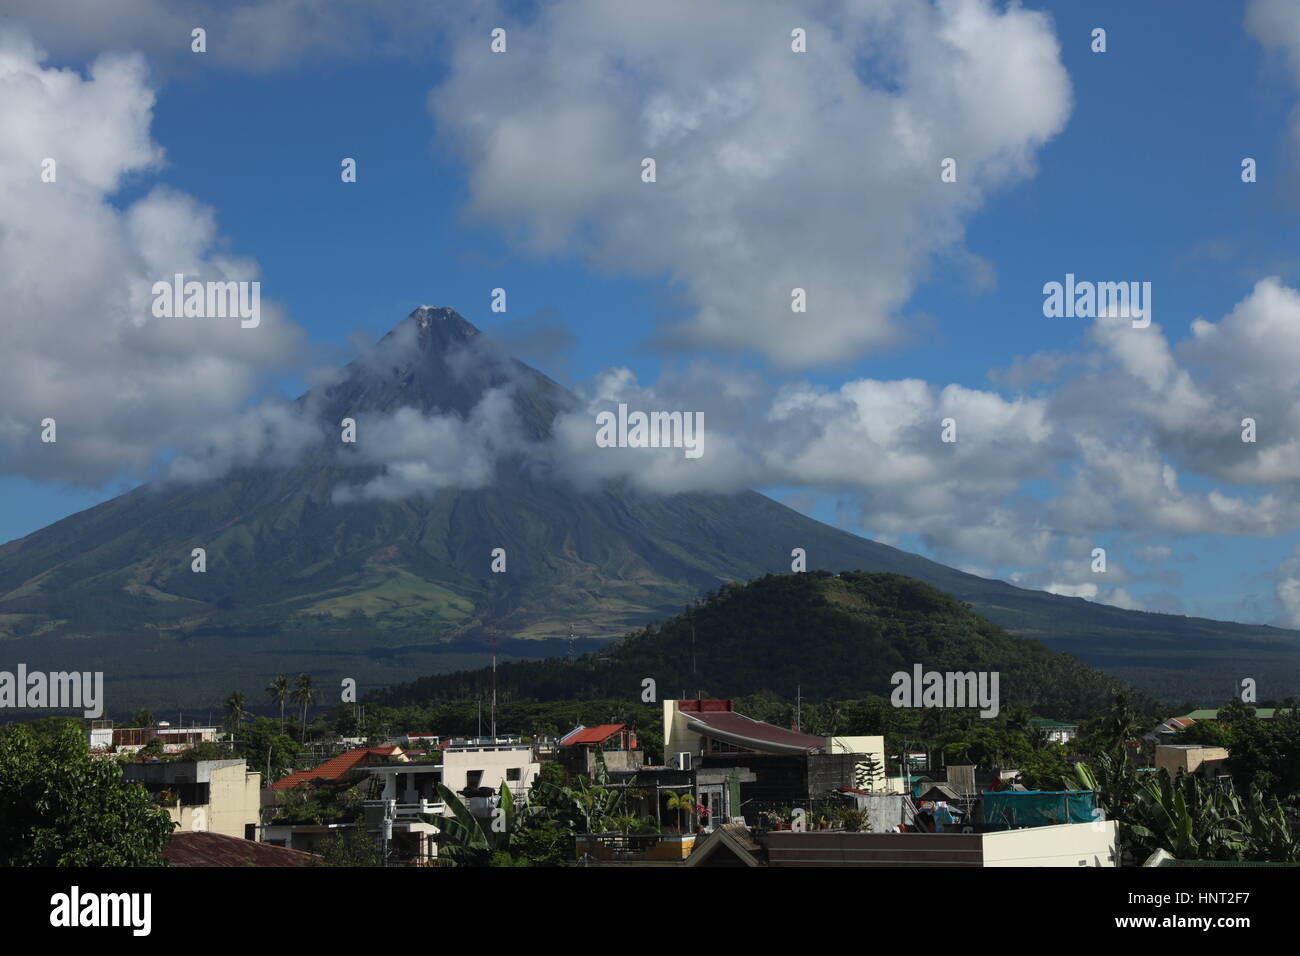 China. 30th Apr, 2016. Philippines-April 30 2016: (EDITORIAL USE ONLY. CHINA OUT) .Scenery of Mayon Volcano in Philippines, April 30th, 2016. Mayon Volcano, is an active stratovolcano in the province of Albay in Bicol Region, on the island of Luzon in the Philippines. Renowned as the ''perfect cone'' because of its symmetric conical shape, the volcano and its surrounding landscape was declared a national park on July 20, 1938, the first in the nation. It was reclassified a Natural Park and renamed Mayon Volcano Natural Park in the year 2000.Local folklore refers to the volcano being named a Stock Photo